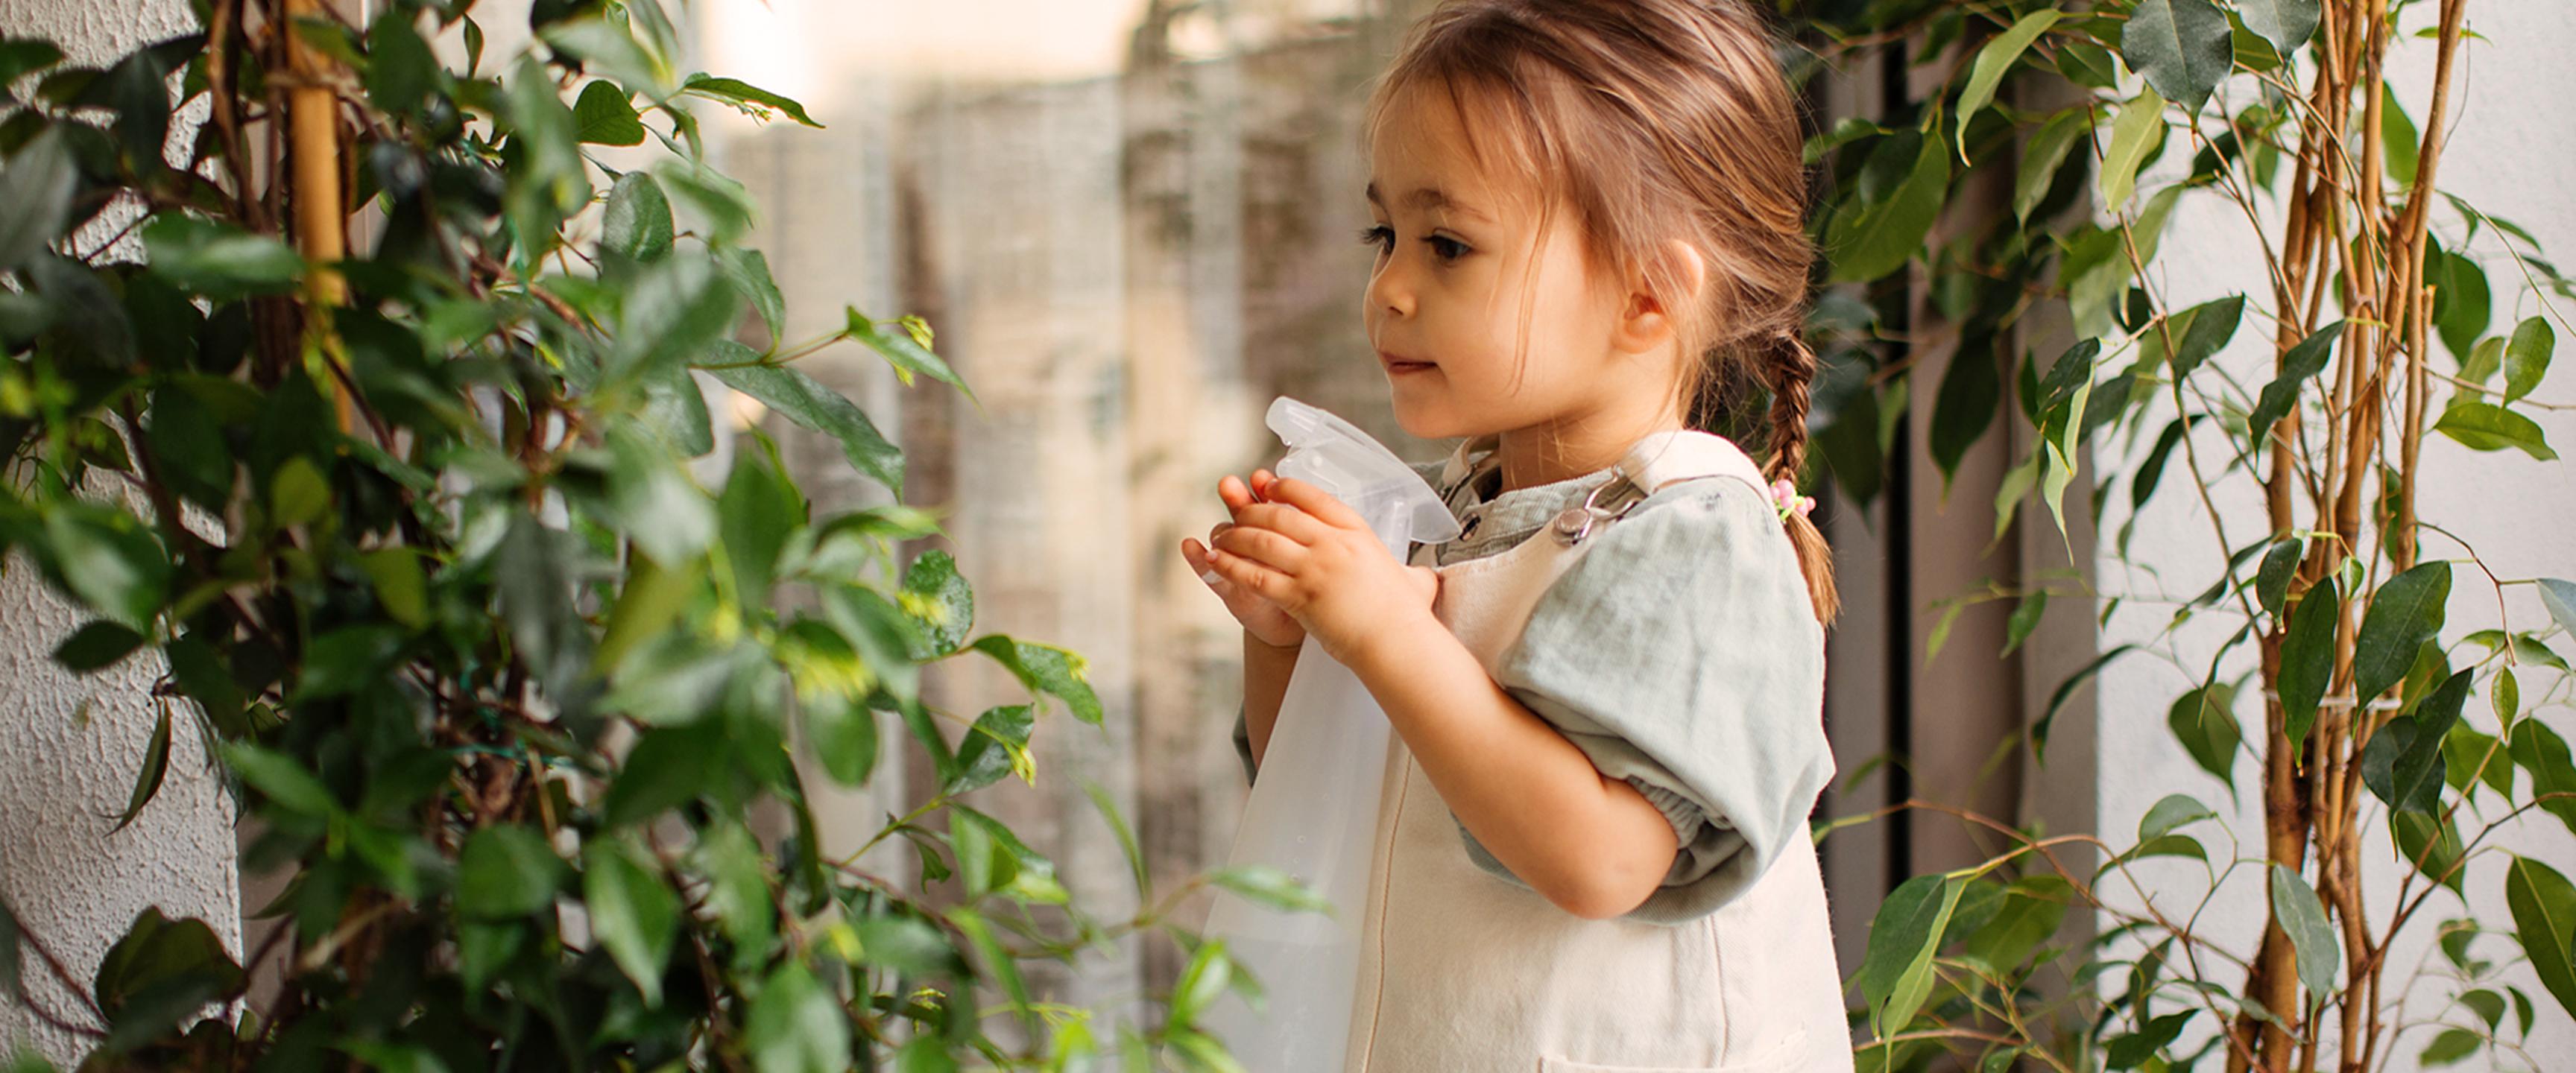 Little girl watering plants with a spray bottle.